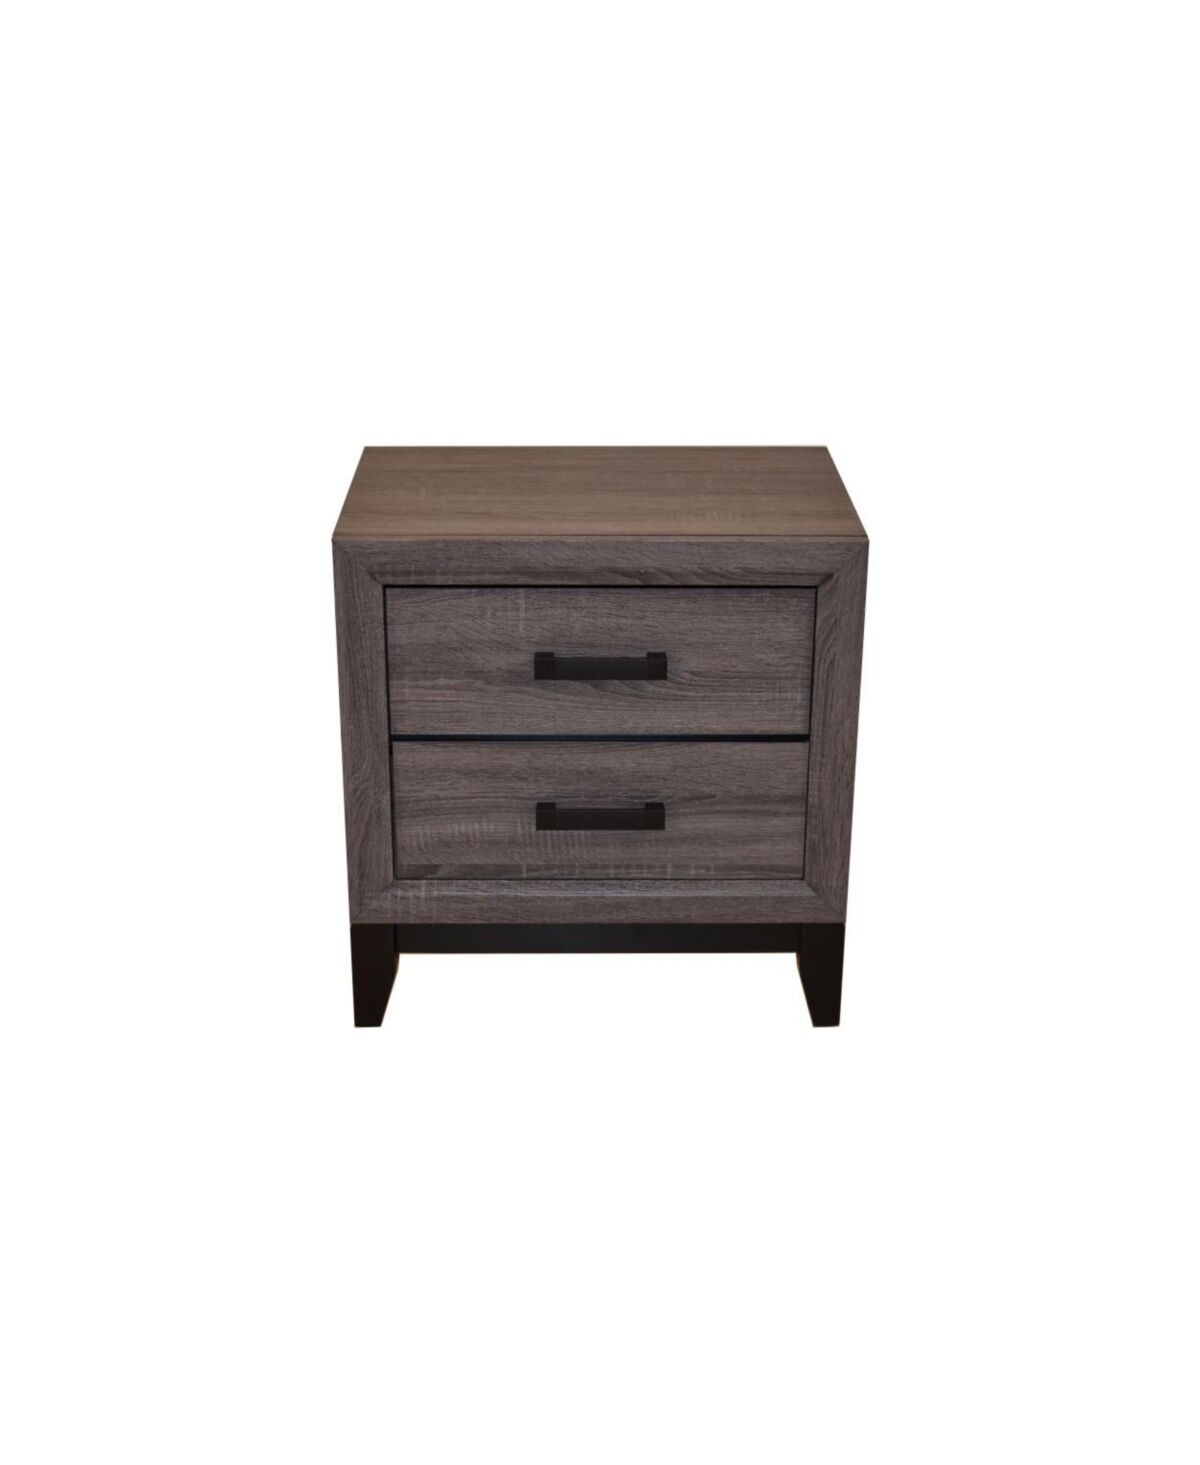 Simplie Fun Galaxy Home Contemporary Hudson Made With Wood Nightstand in Gray - Grey